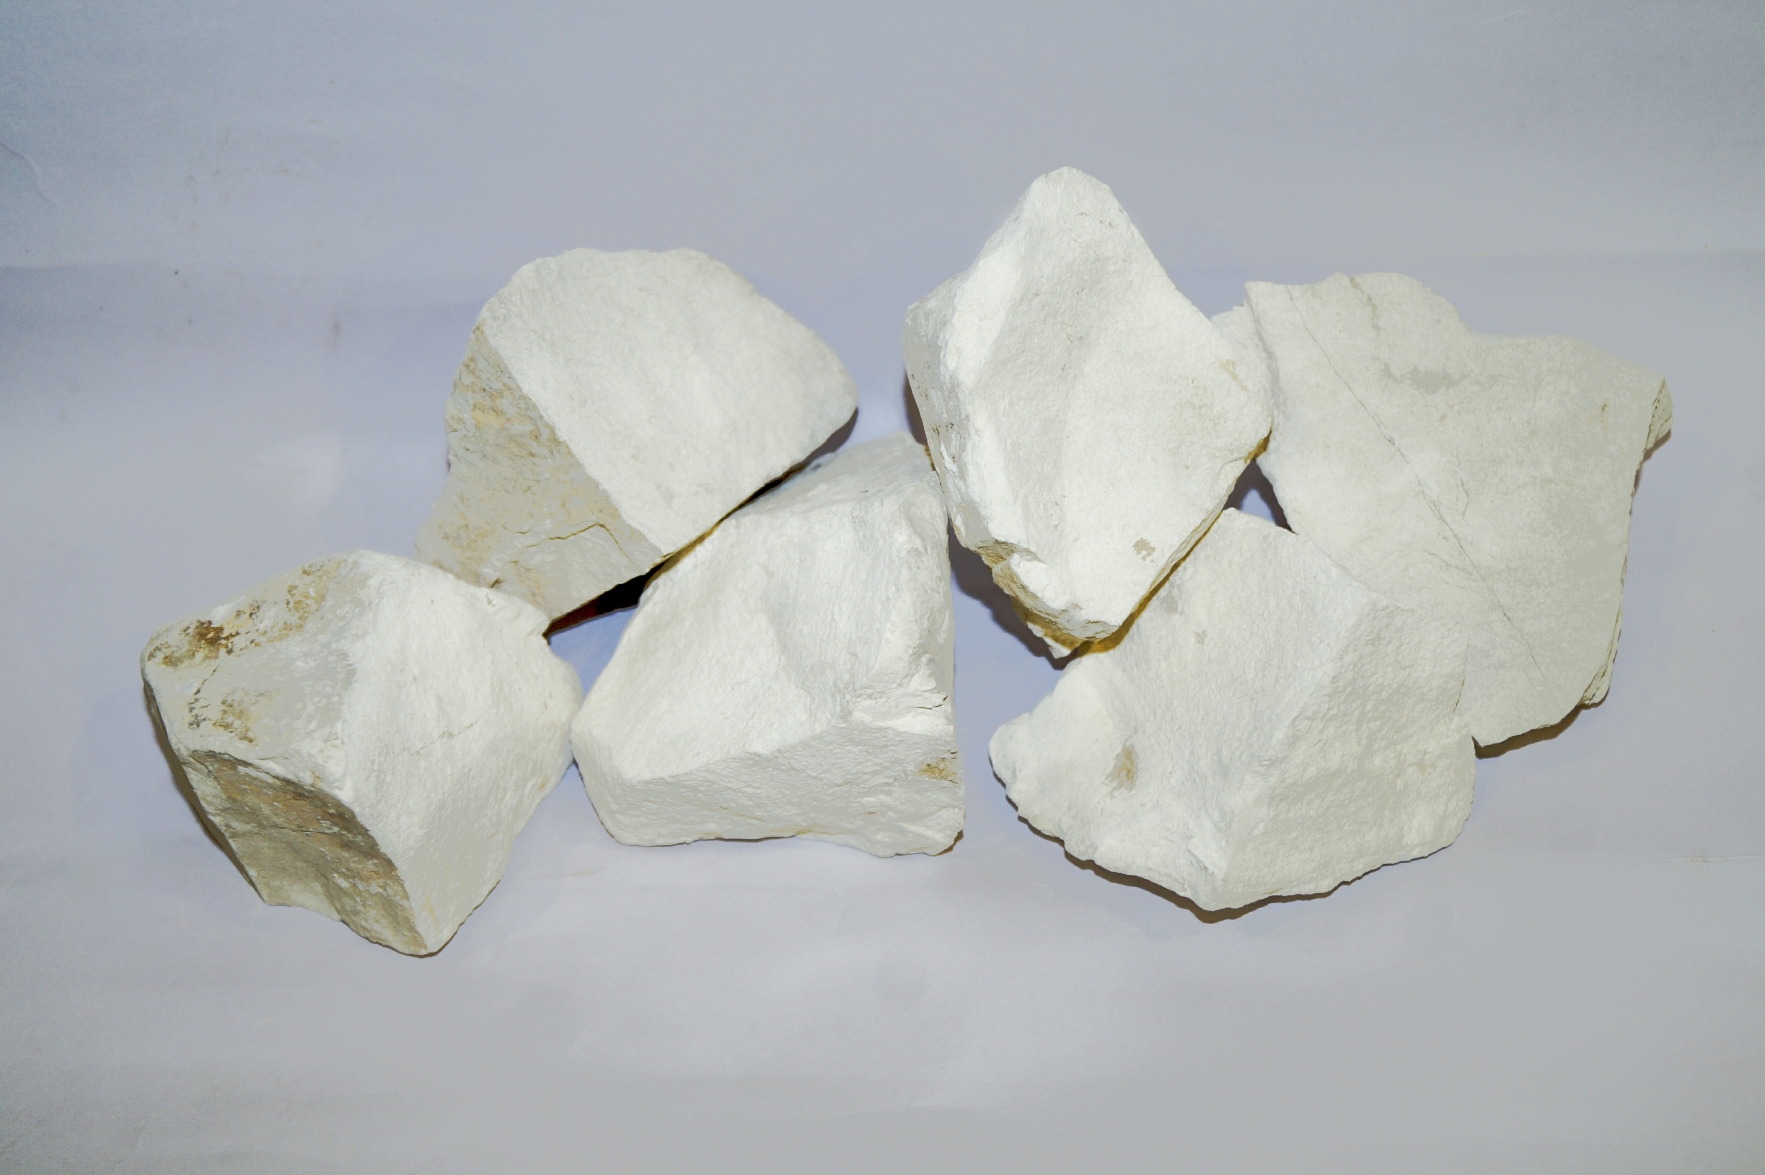 pure dolomite manufacturer and suppliers in india